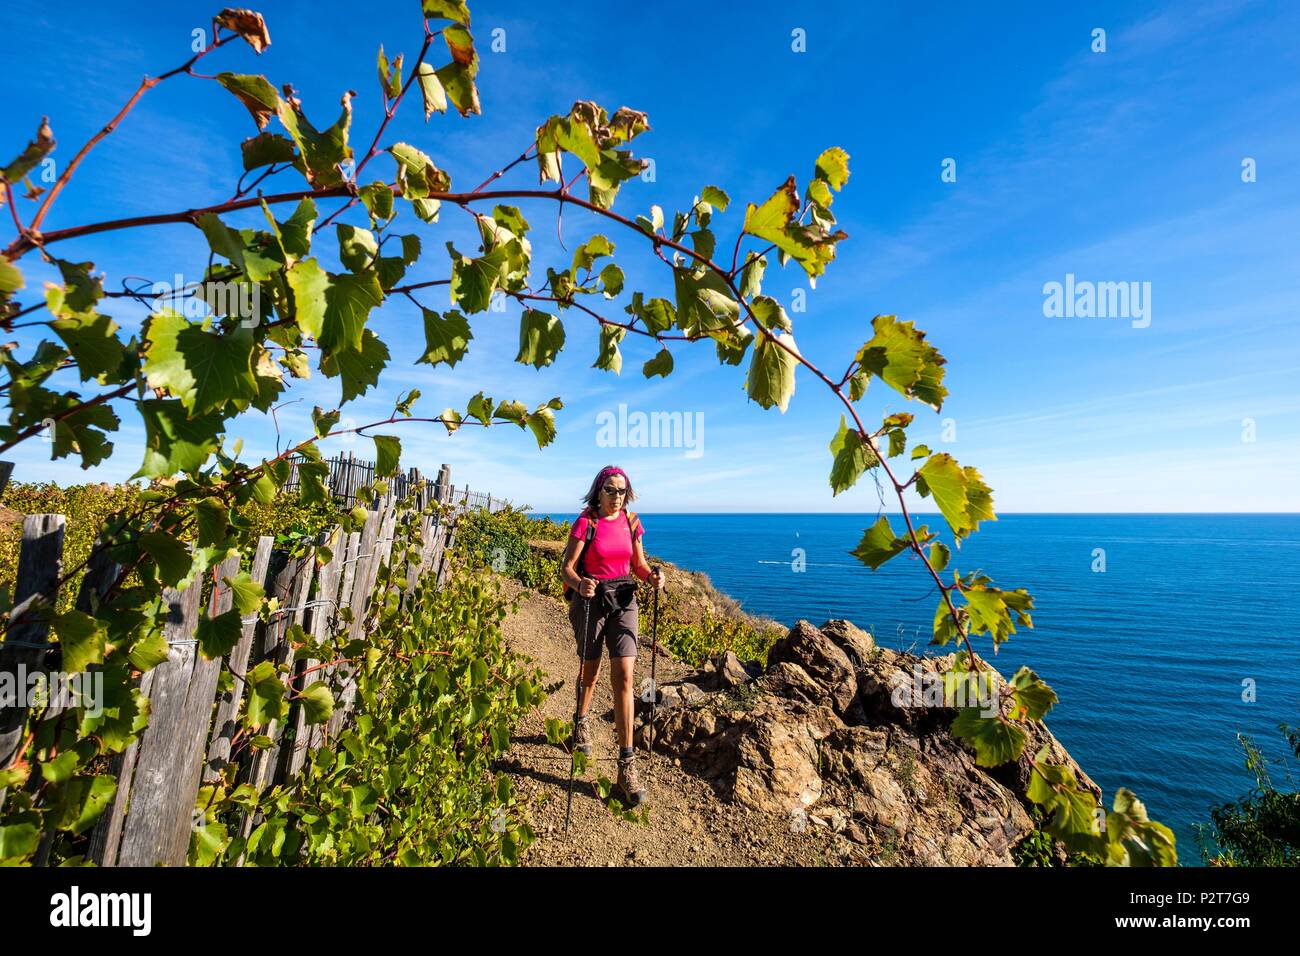 France, Pyrenees Orientales, Cote Vermeille, hiking from Banyuls sur Mer to Cerbere on the coastal path, Cap de l'Abeille Stock Photo